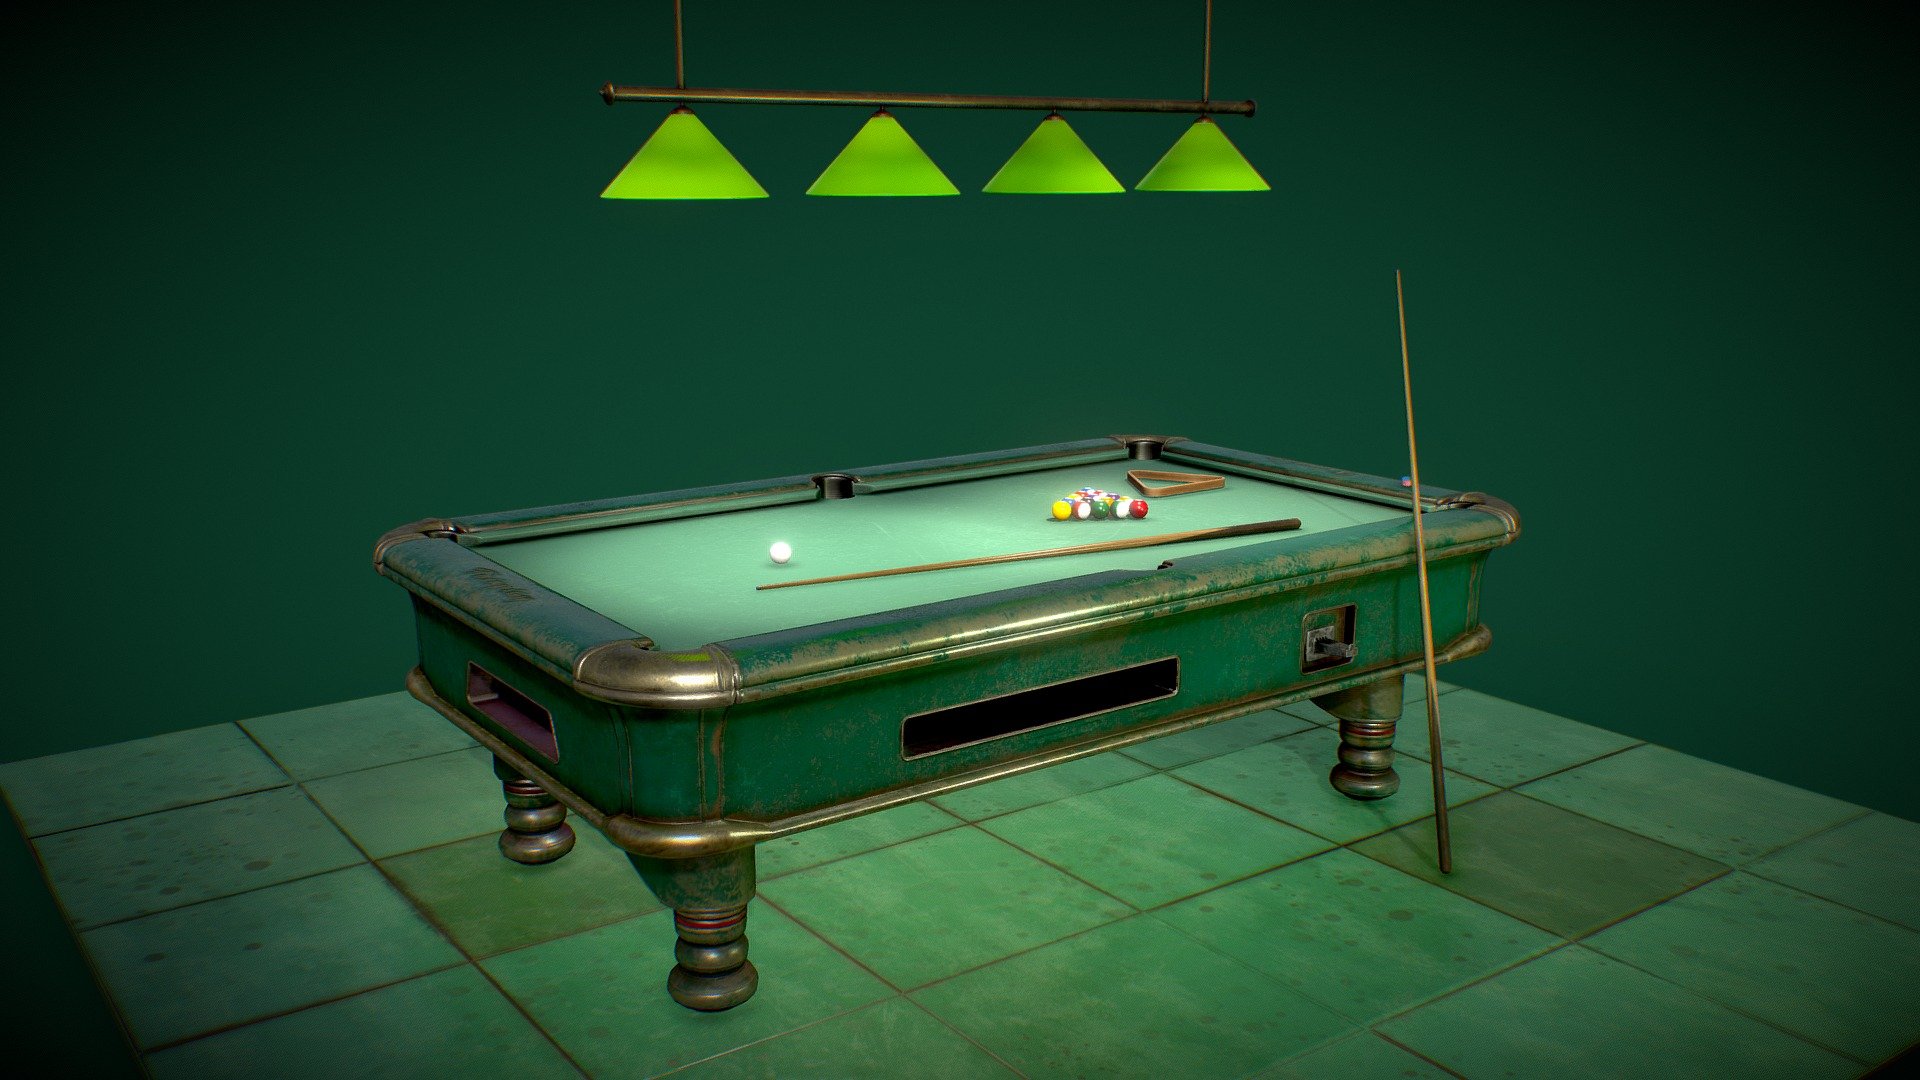 This table can tell many dark agreements, epic unknown tournaments and hand exchange of valuable possessions. Worn out pool table with 5 assets: pool table, chalk, cues, balls, lamp and floor. The assets are made in low poly high detail version with 22.087 polys, and textures in 4096 x 4096 px. ( Ambient occlusion, metallic, roughness, base color, opacity, emission and normal map 3d model